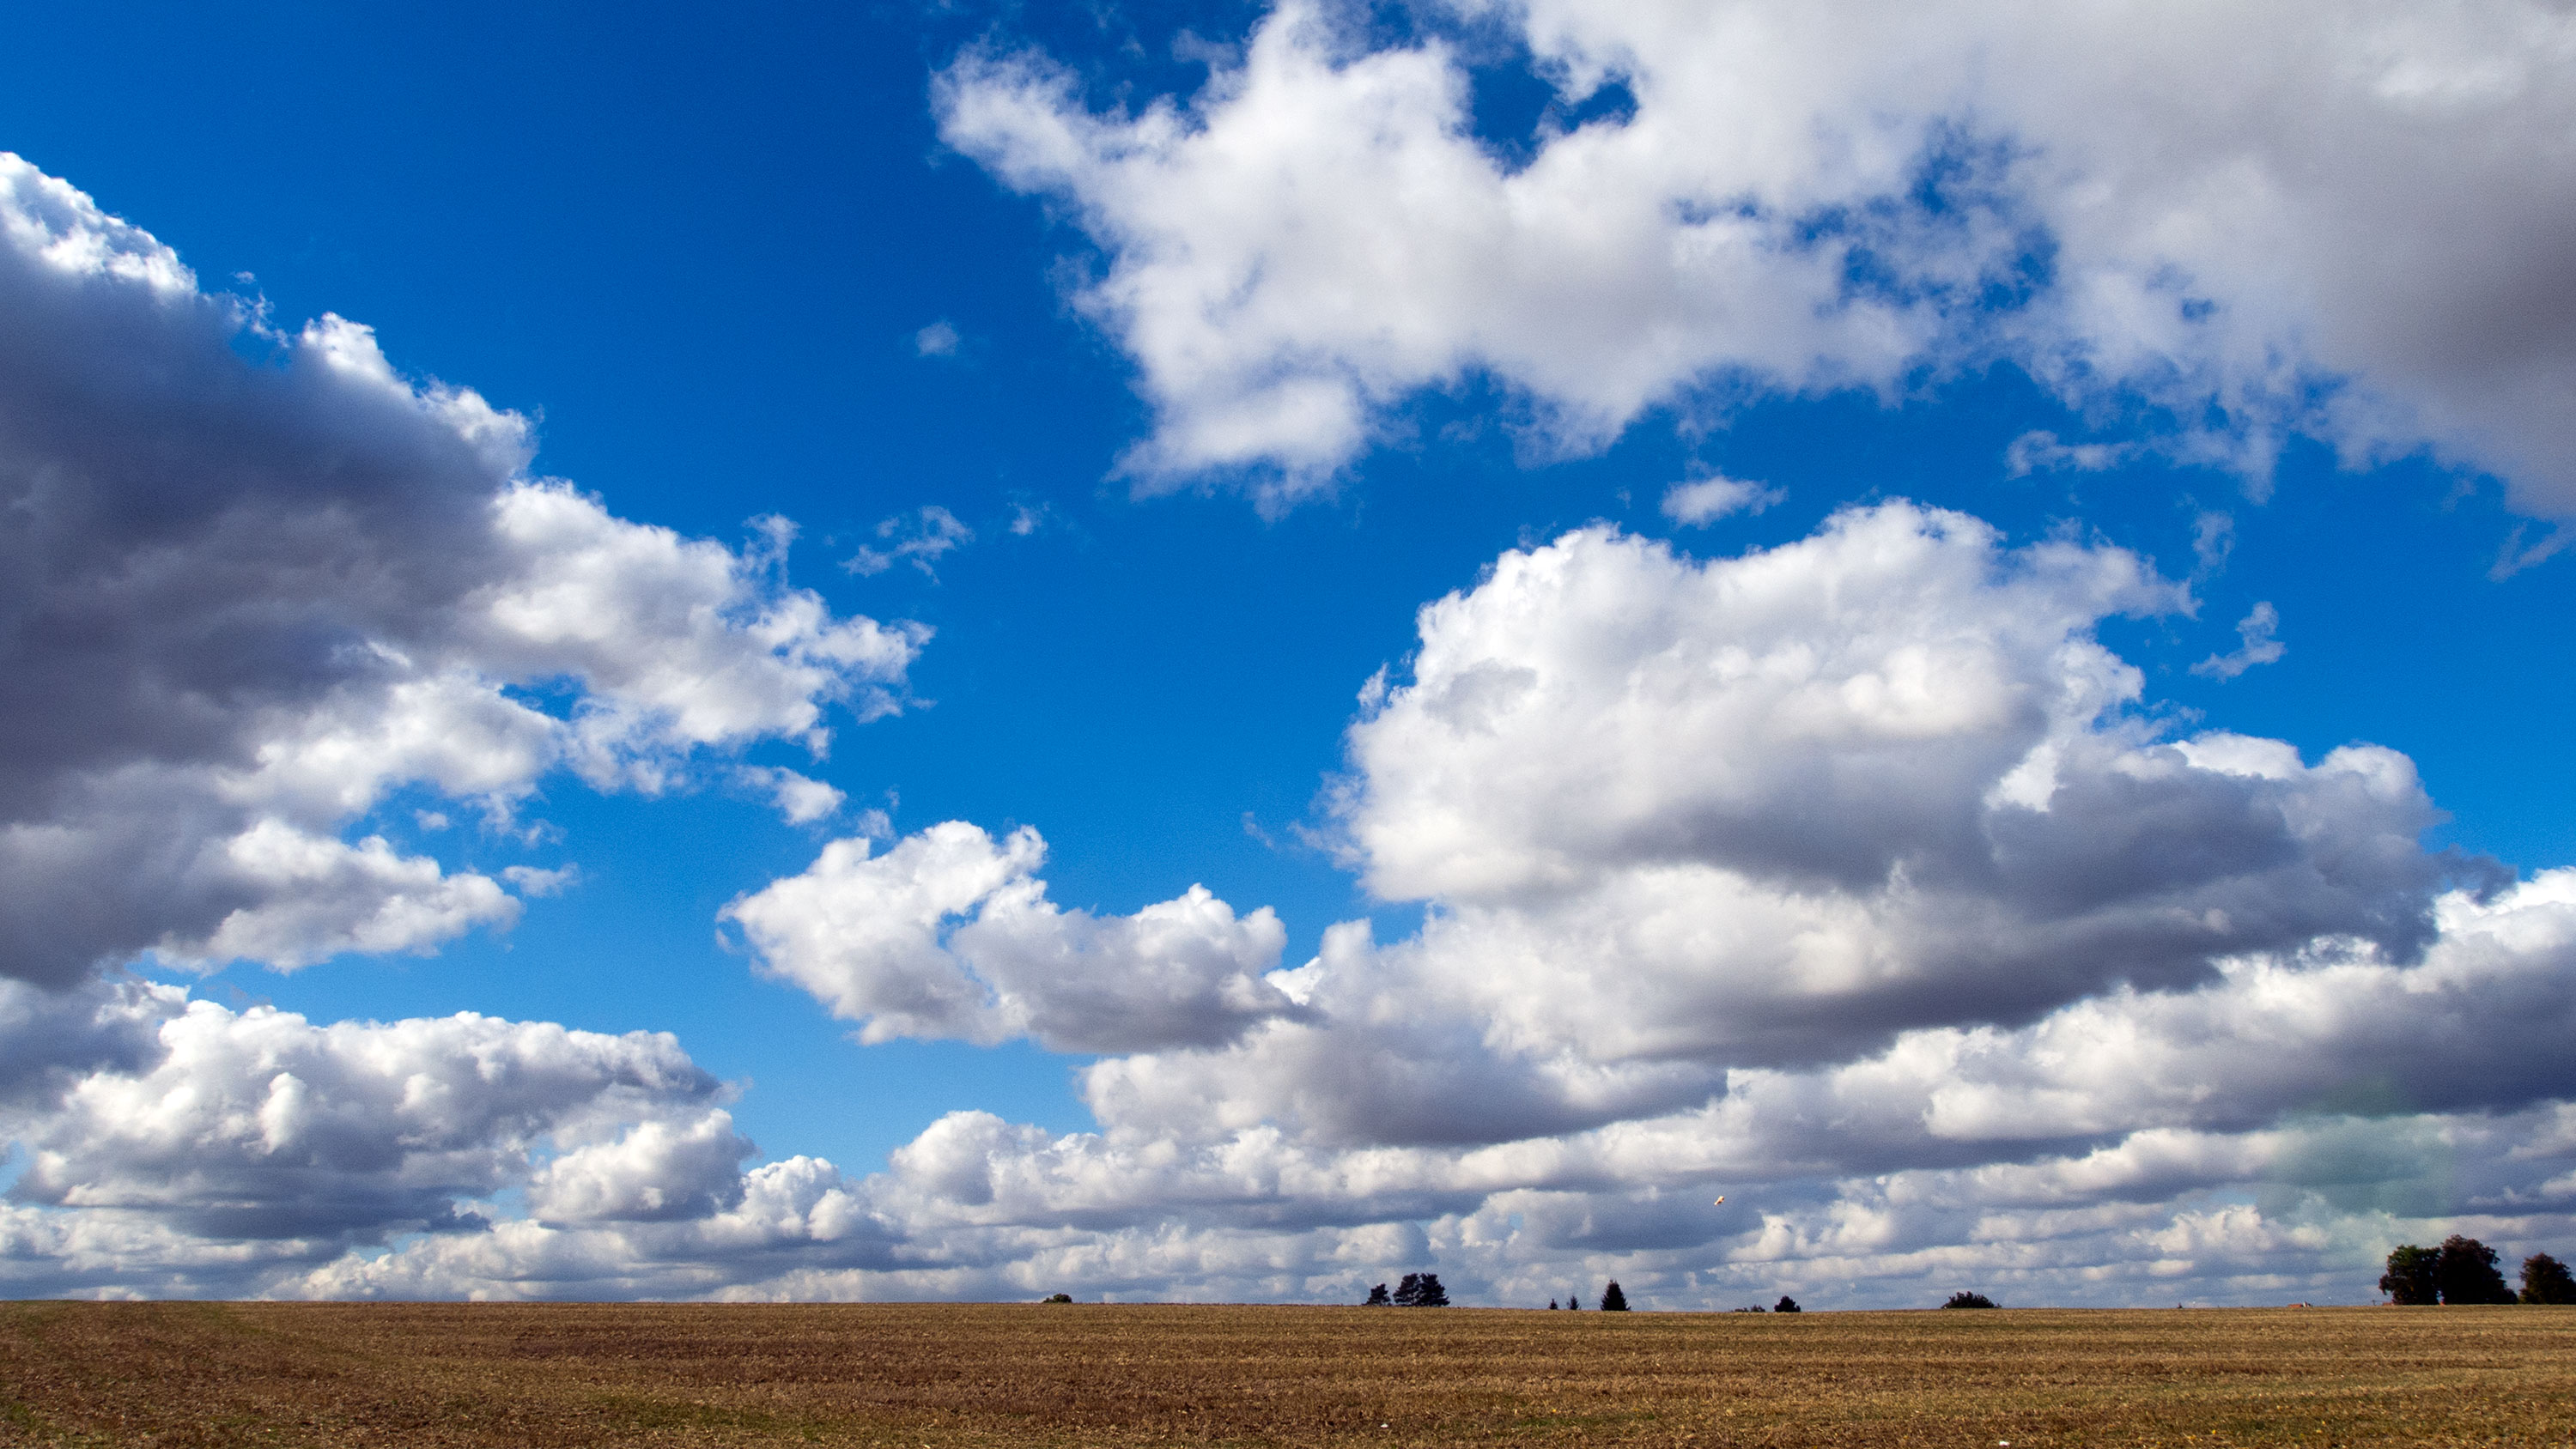 Free Image: Clouds Above The Field | Libreshot Public Domain Photos